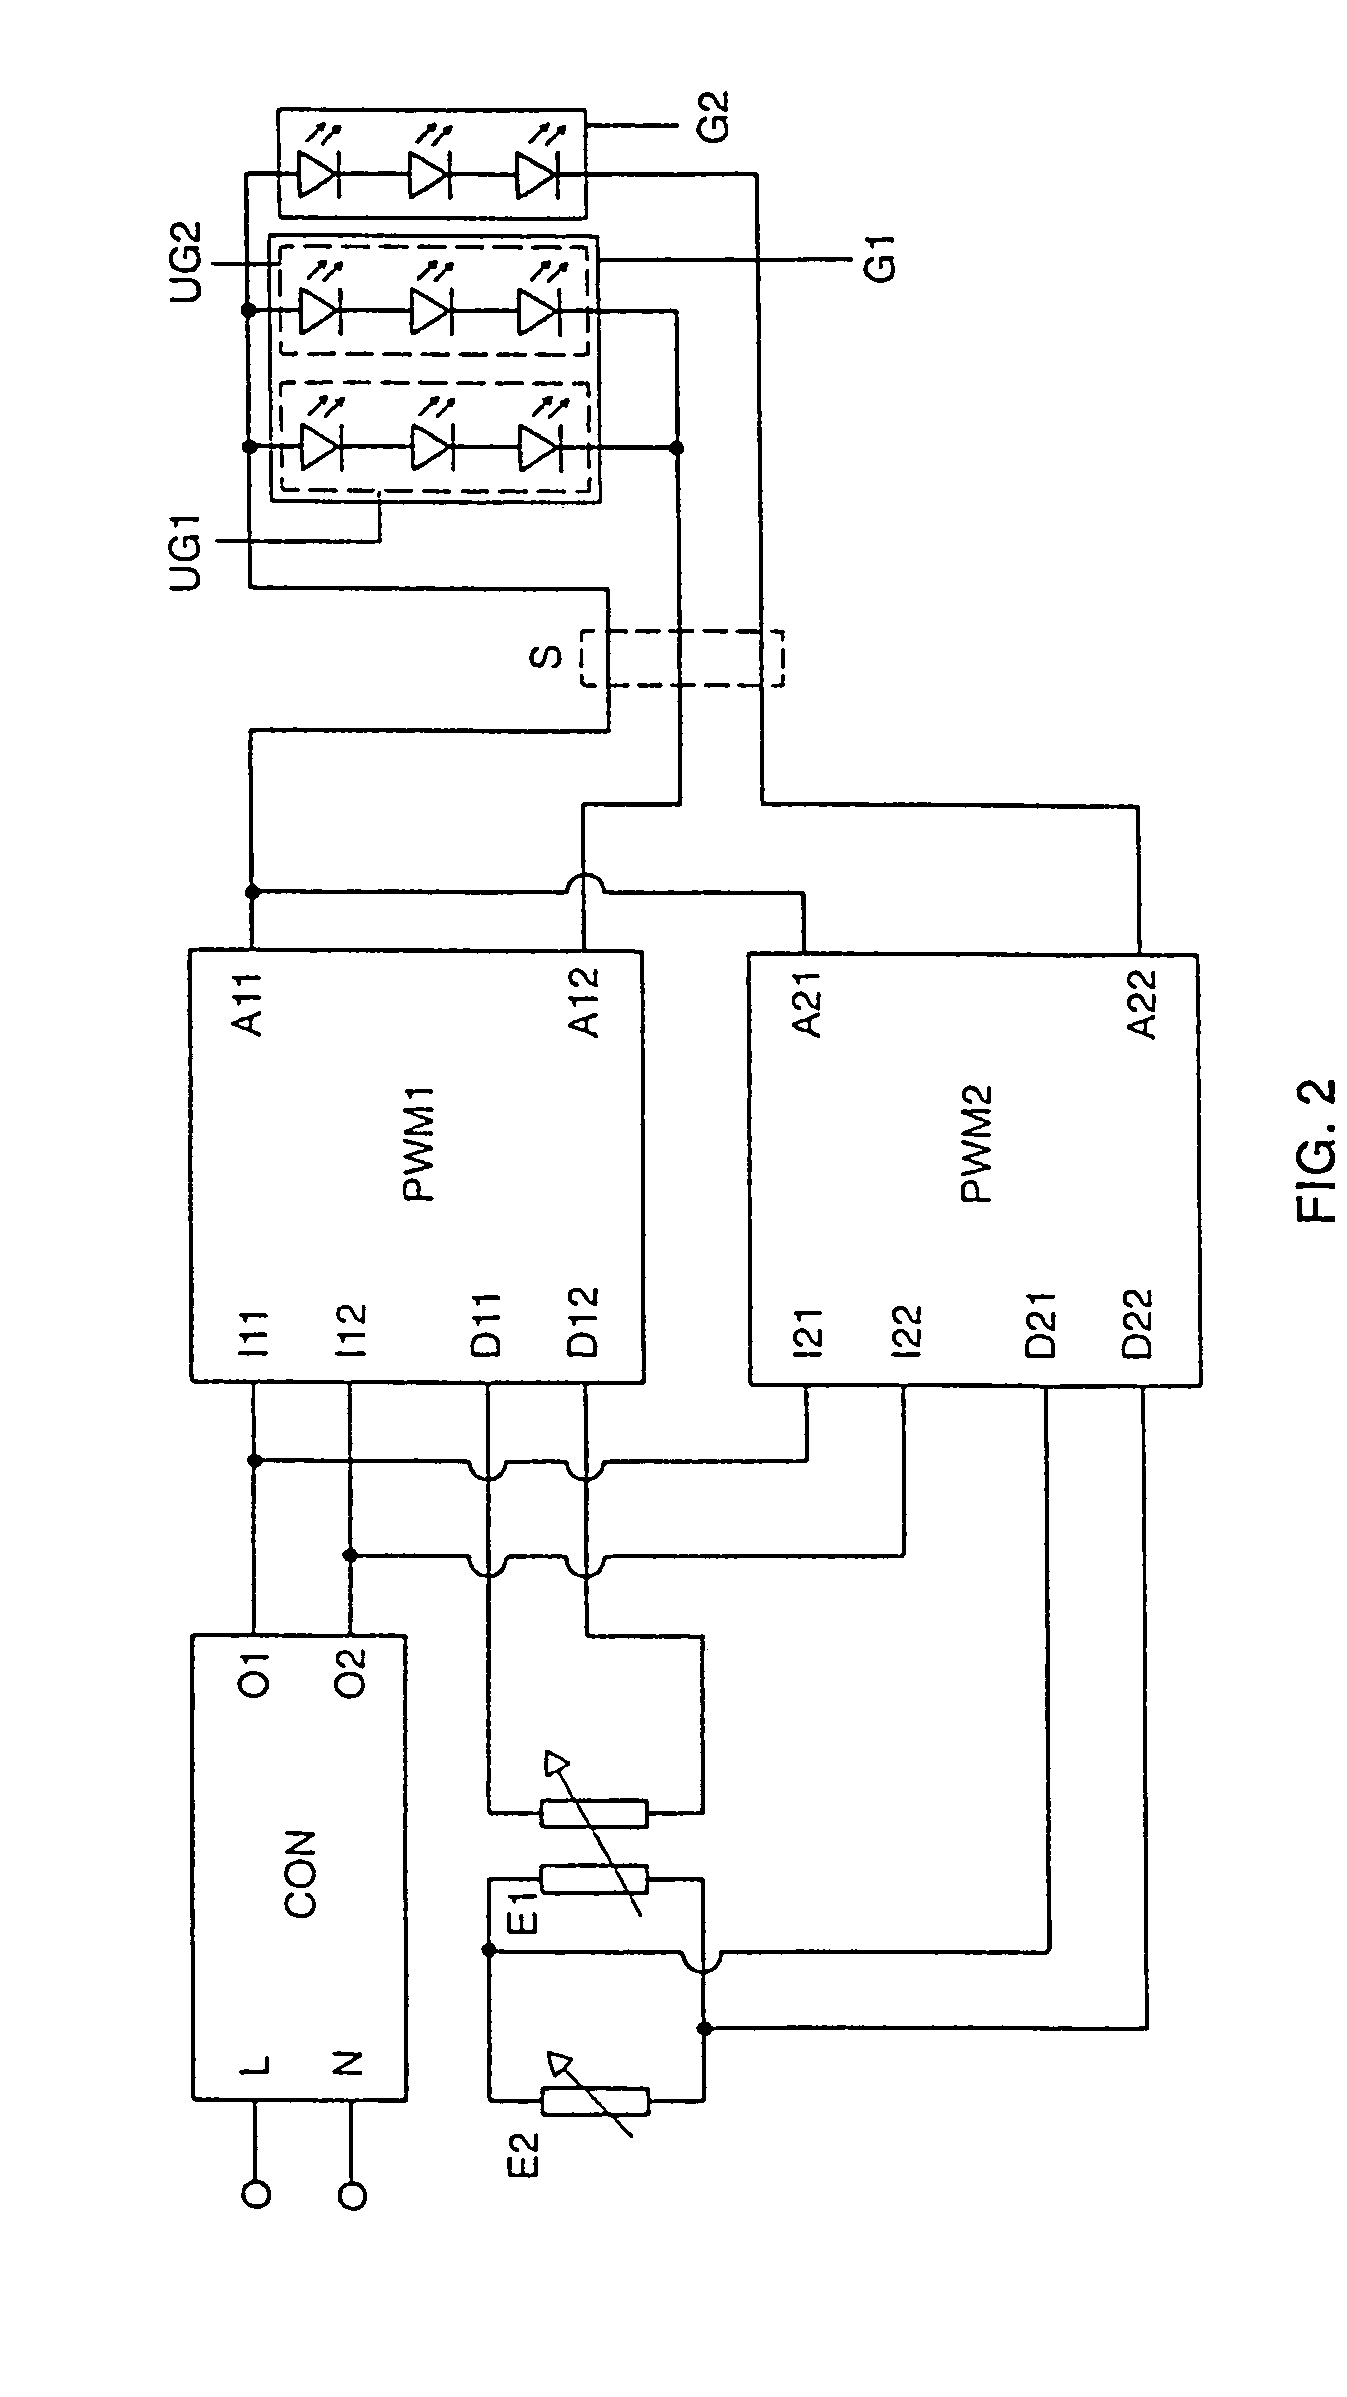 Circuit arrangement and method for an illumination device having settable color and brightness